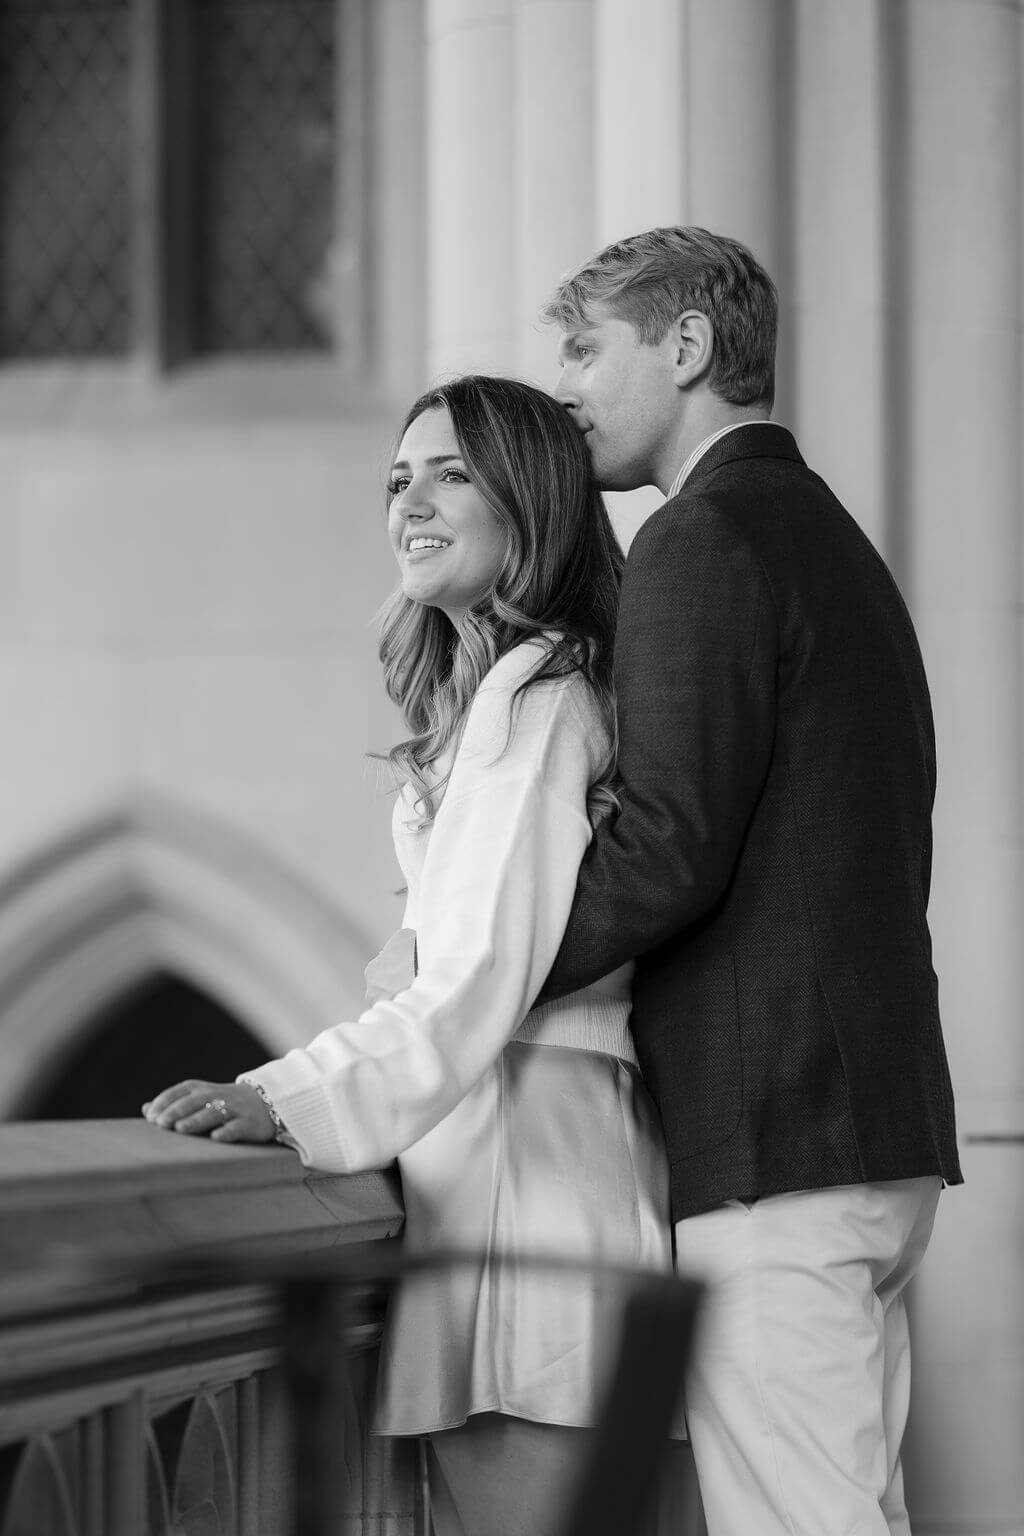 A black and white photo of a smiling woman leaning on a balcony with a man embracing her from behind, both looking into the distance, set against the architectural backdrop of the Washington National Cathedral, captured by Get Ready Photo